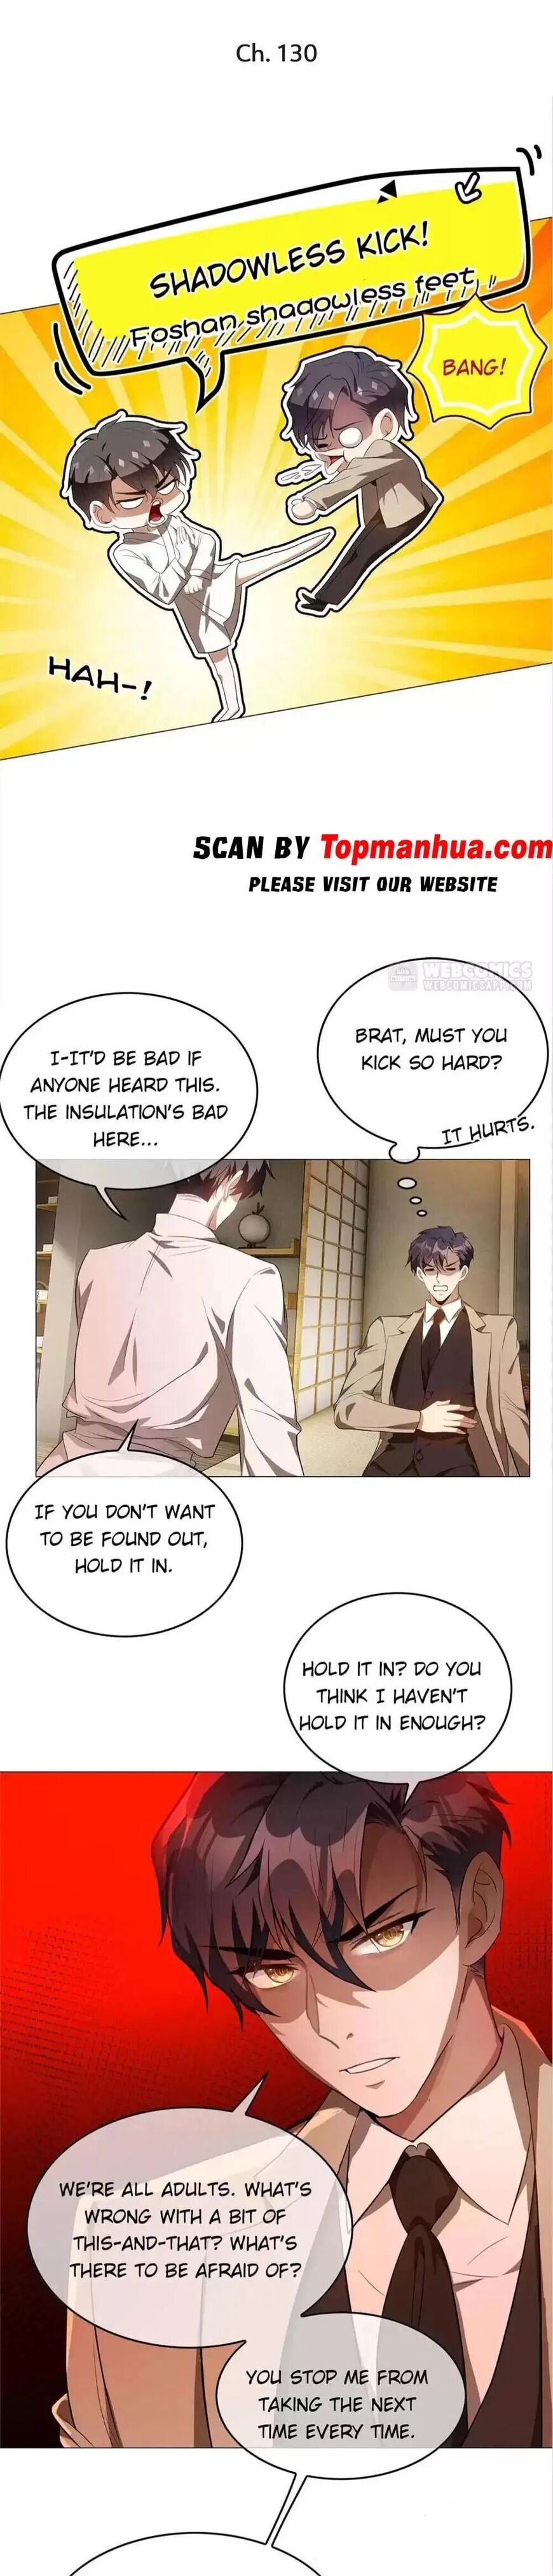 The Innocent Young Master Lu ch.130